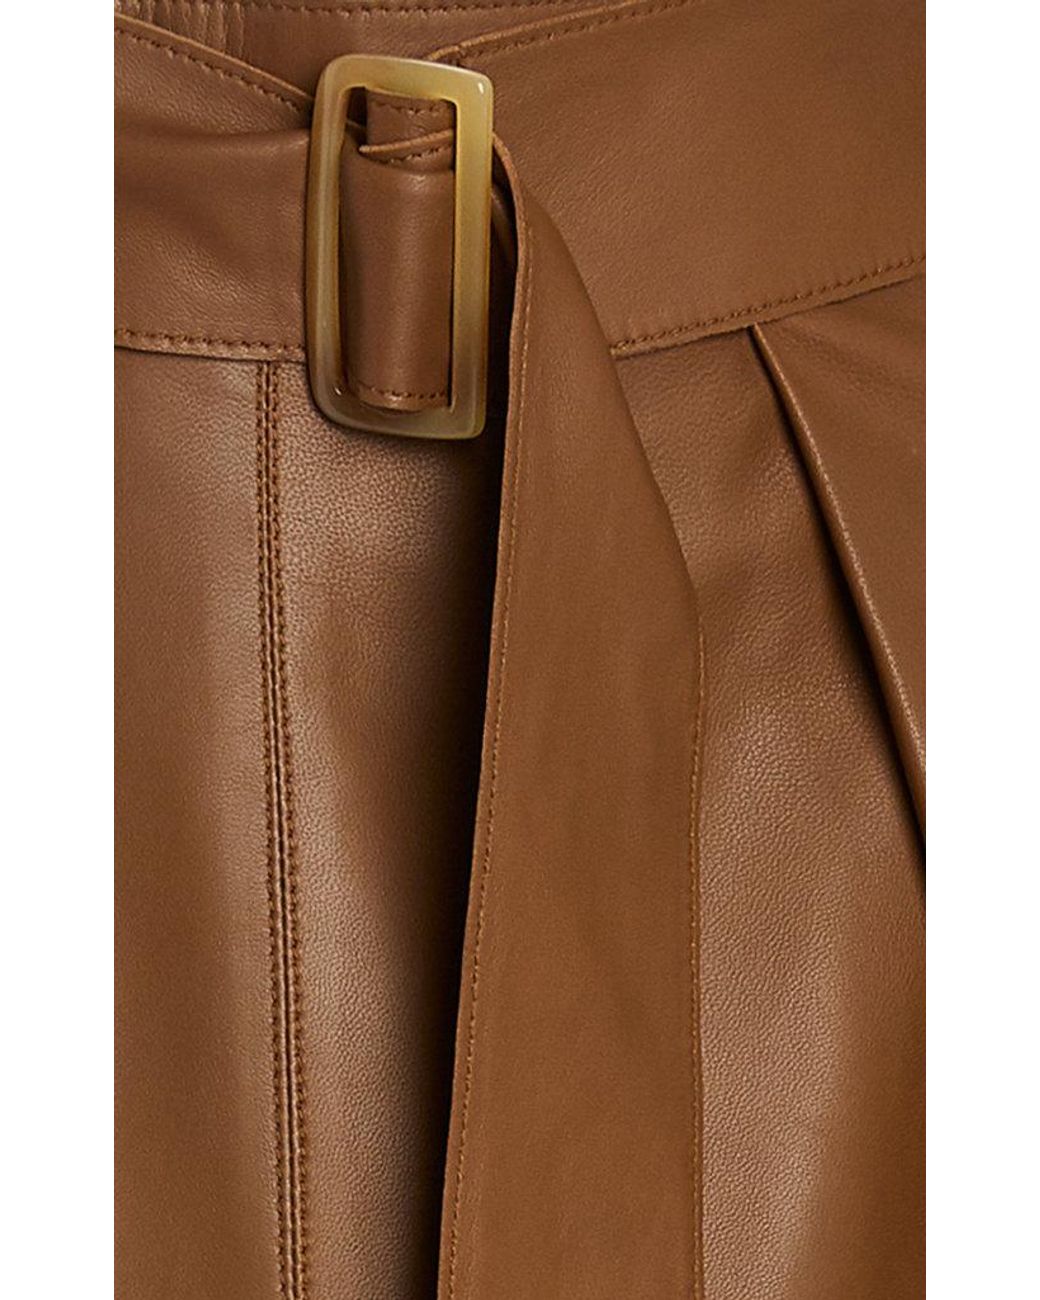 Vince, Belted Leather Skirt in Dark Wheat